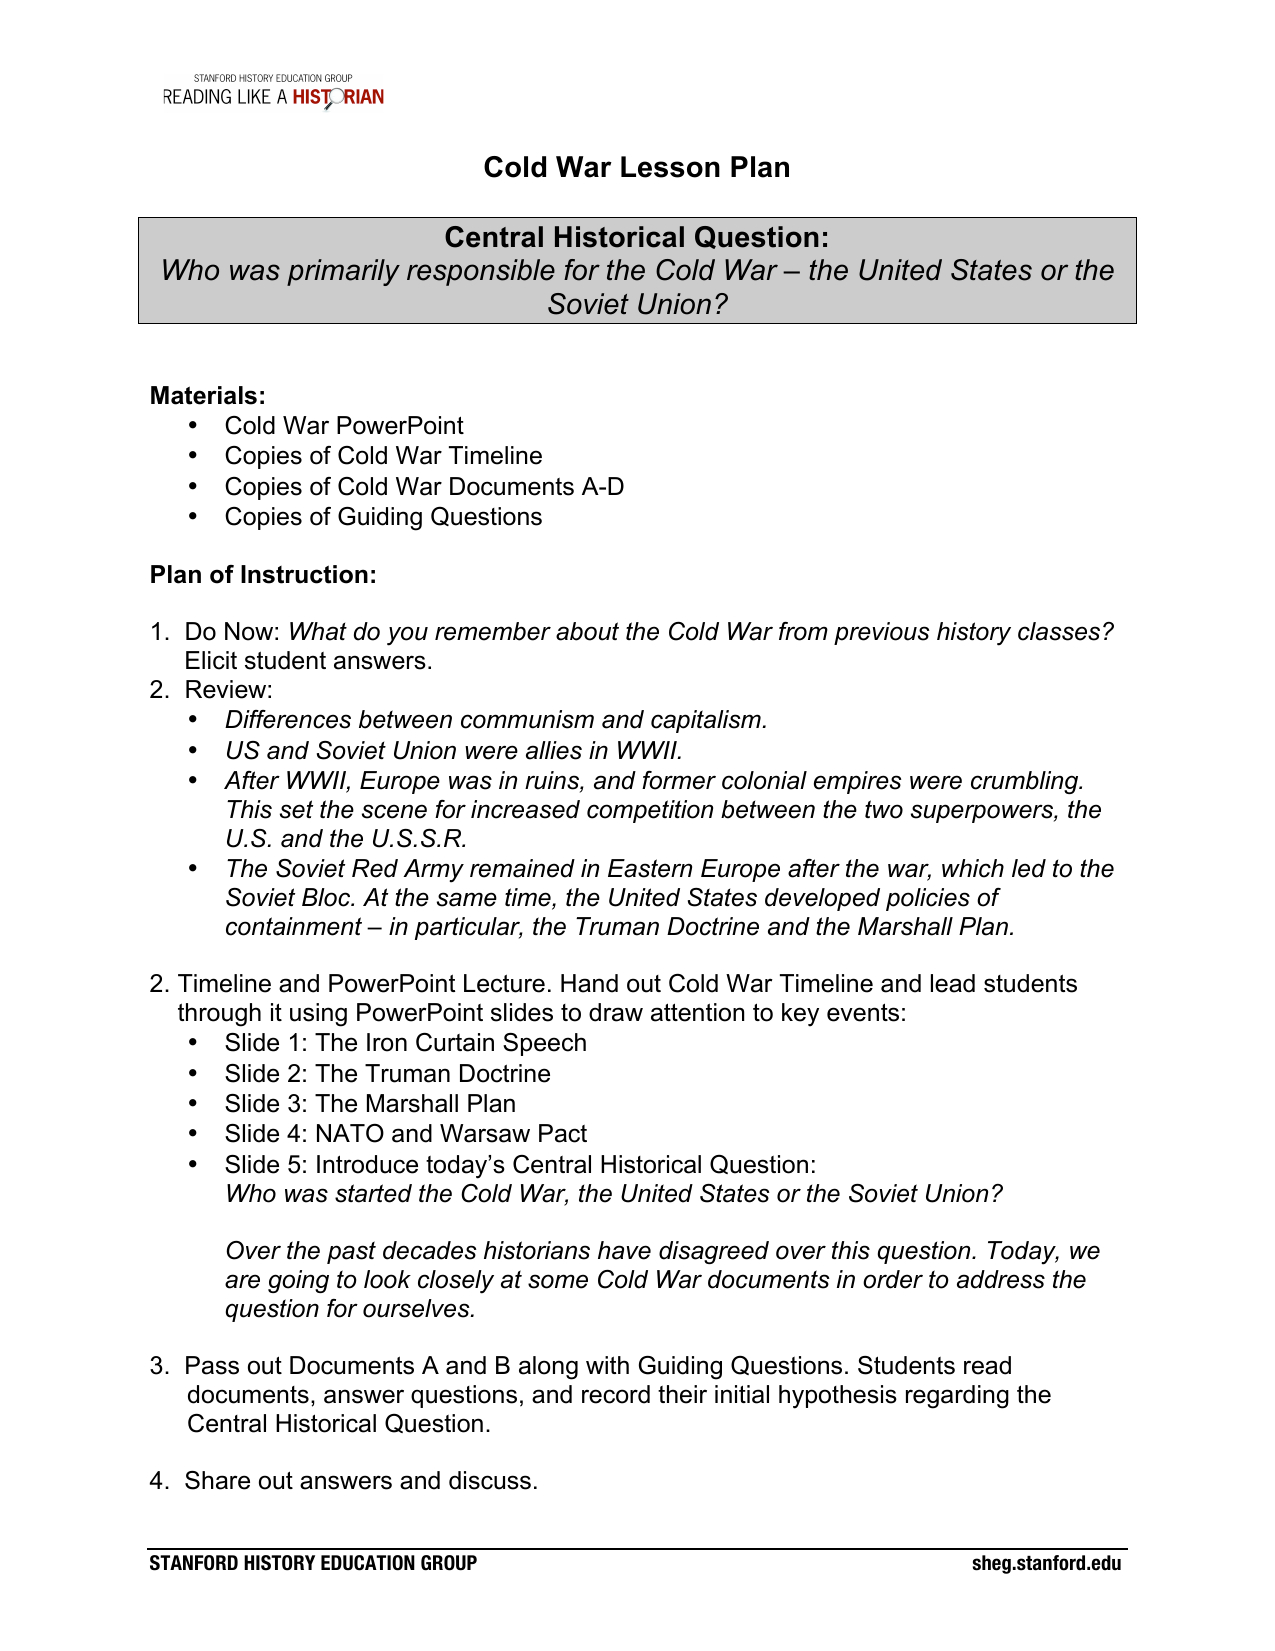 Cold R Lesson Plan  Stanford History Education Group